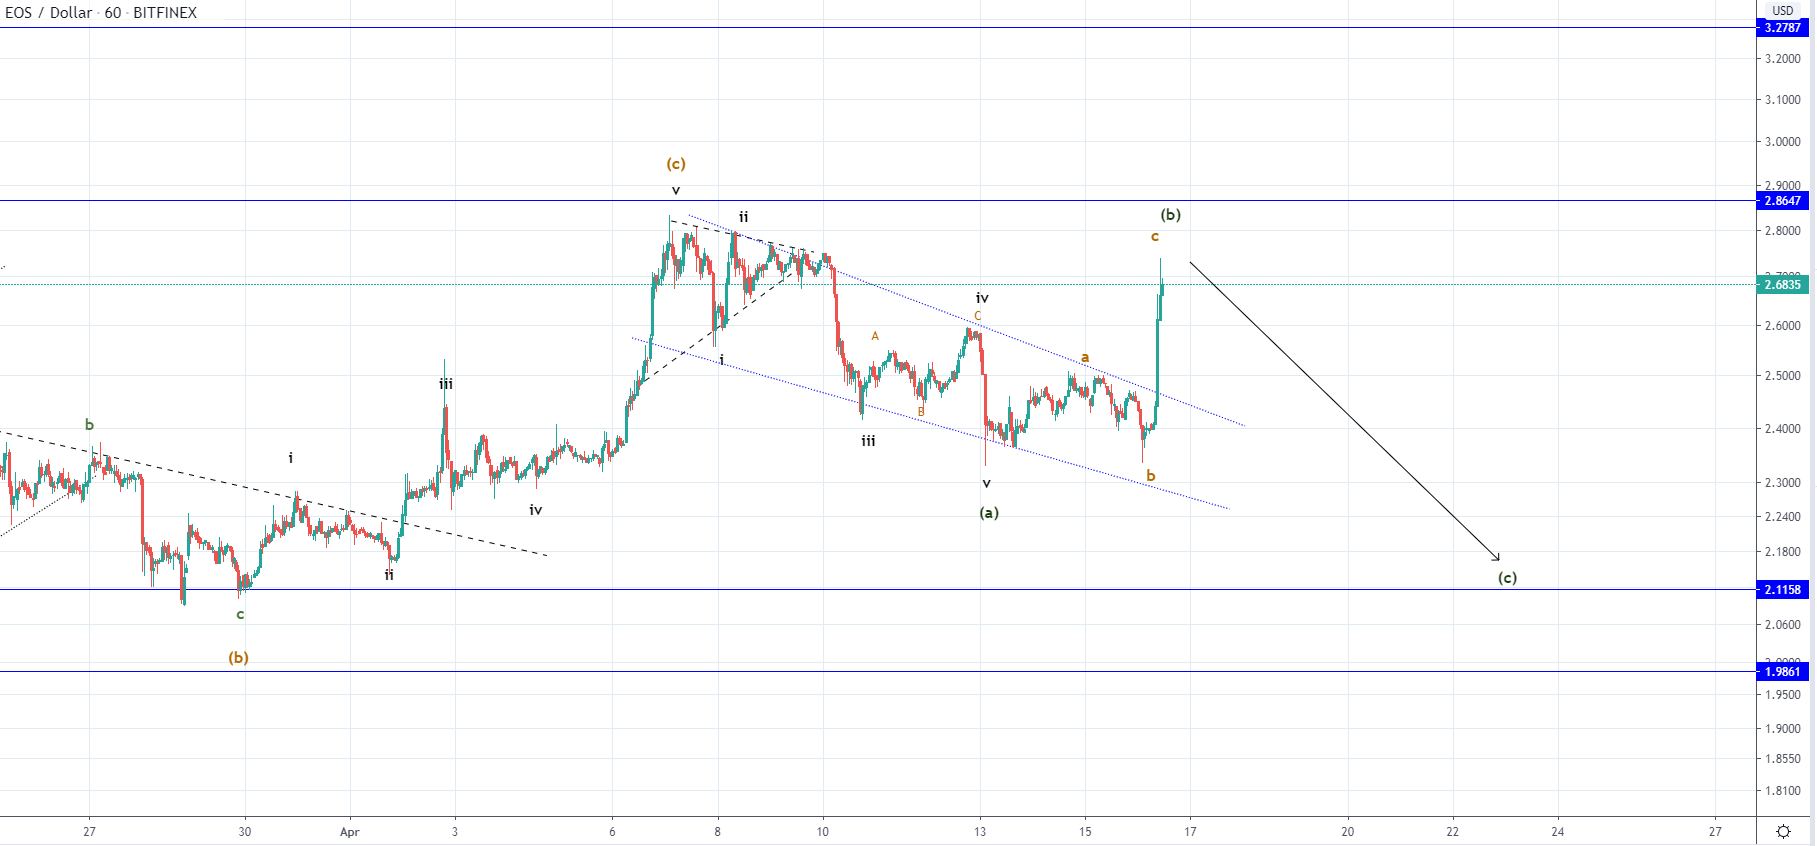 LTC and EOS - Massive Spike Seen But Could Still Be Corrective